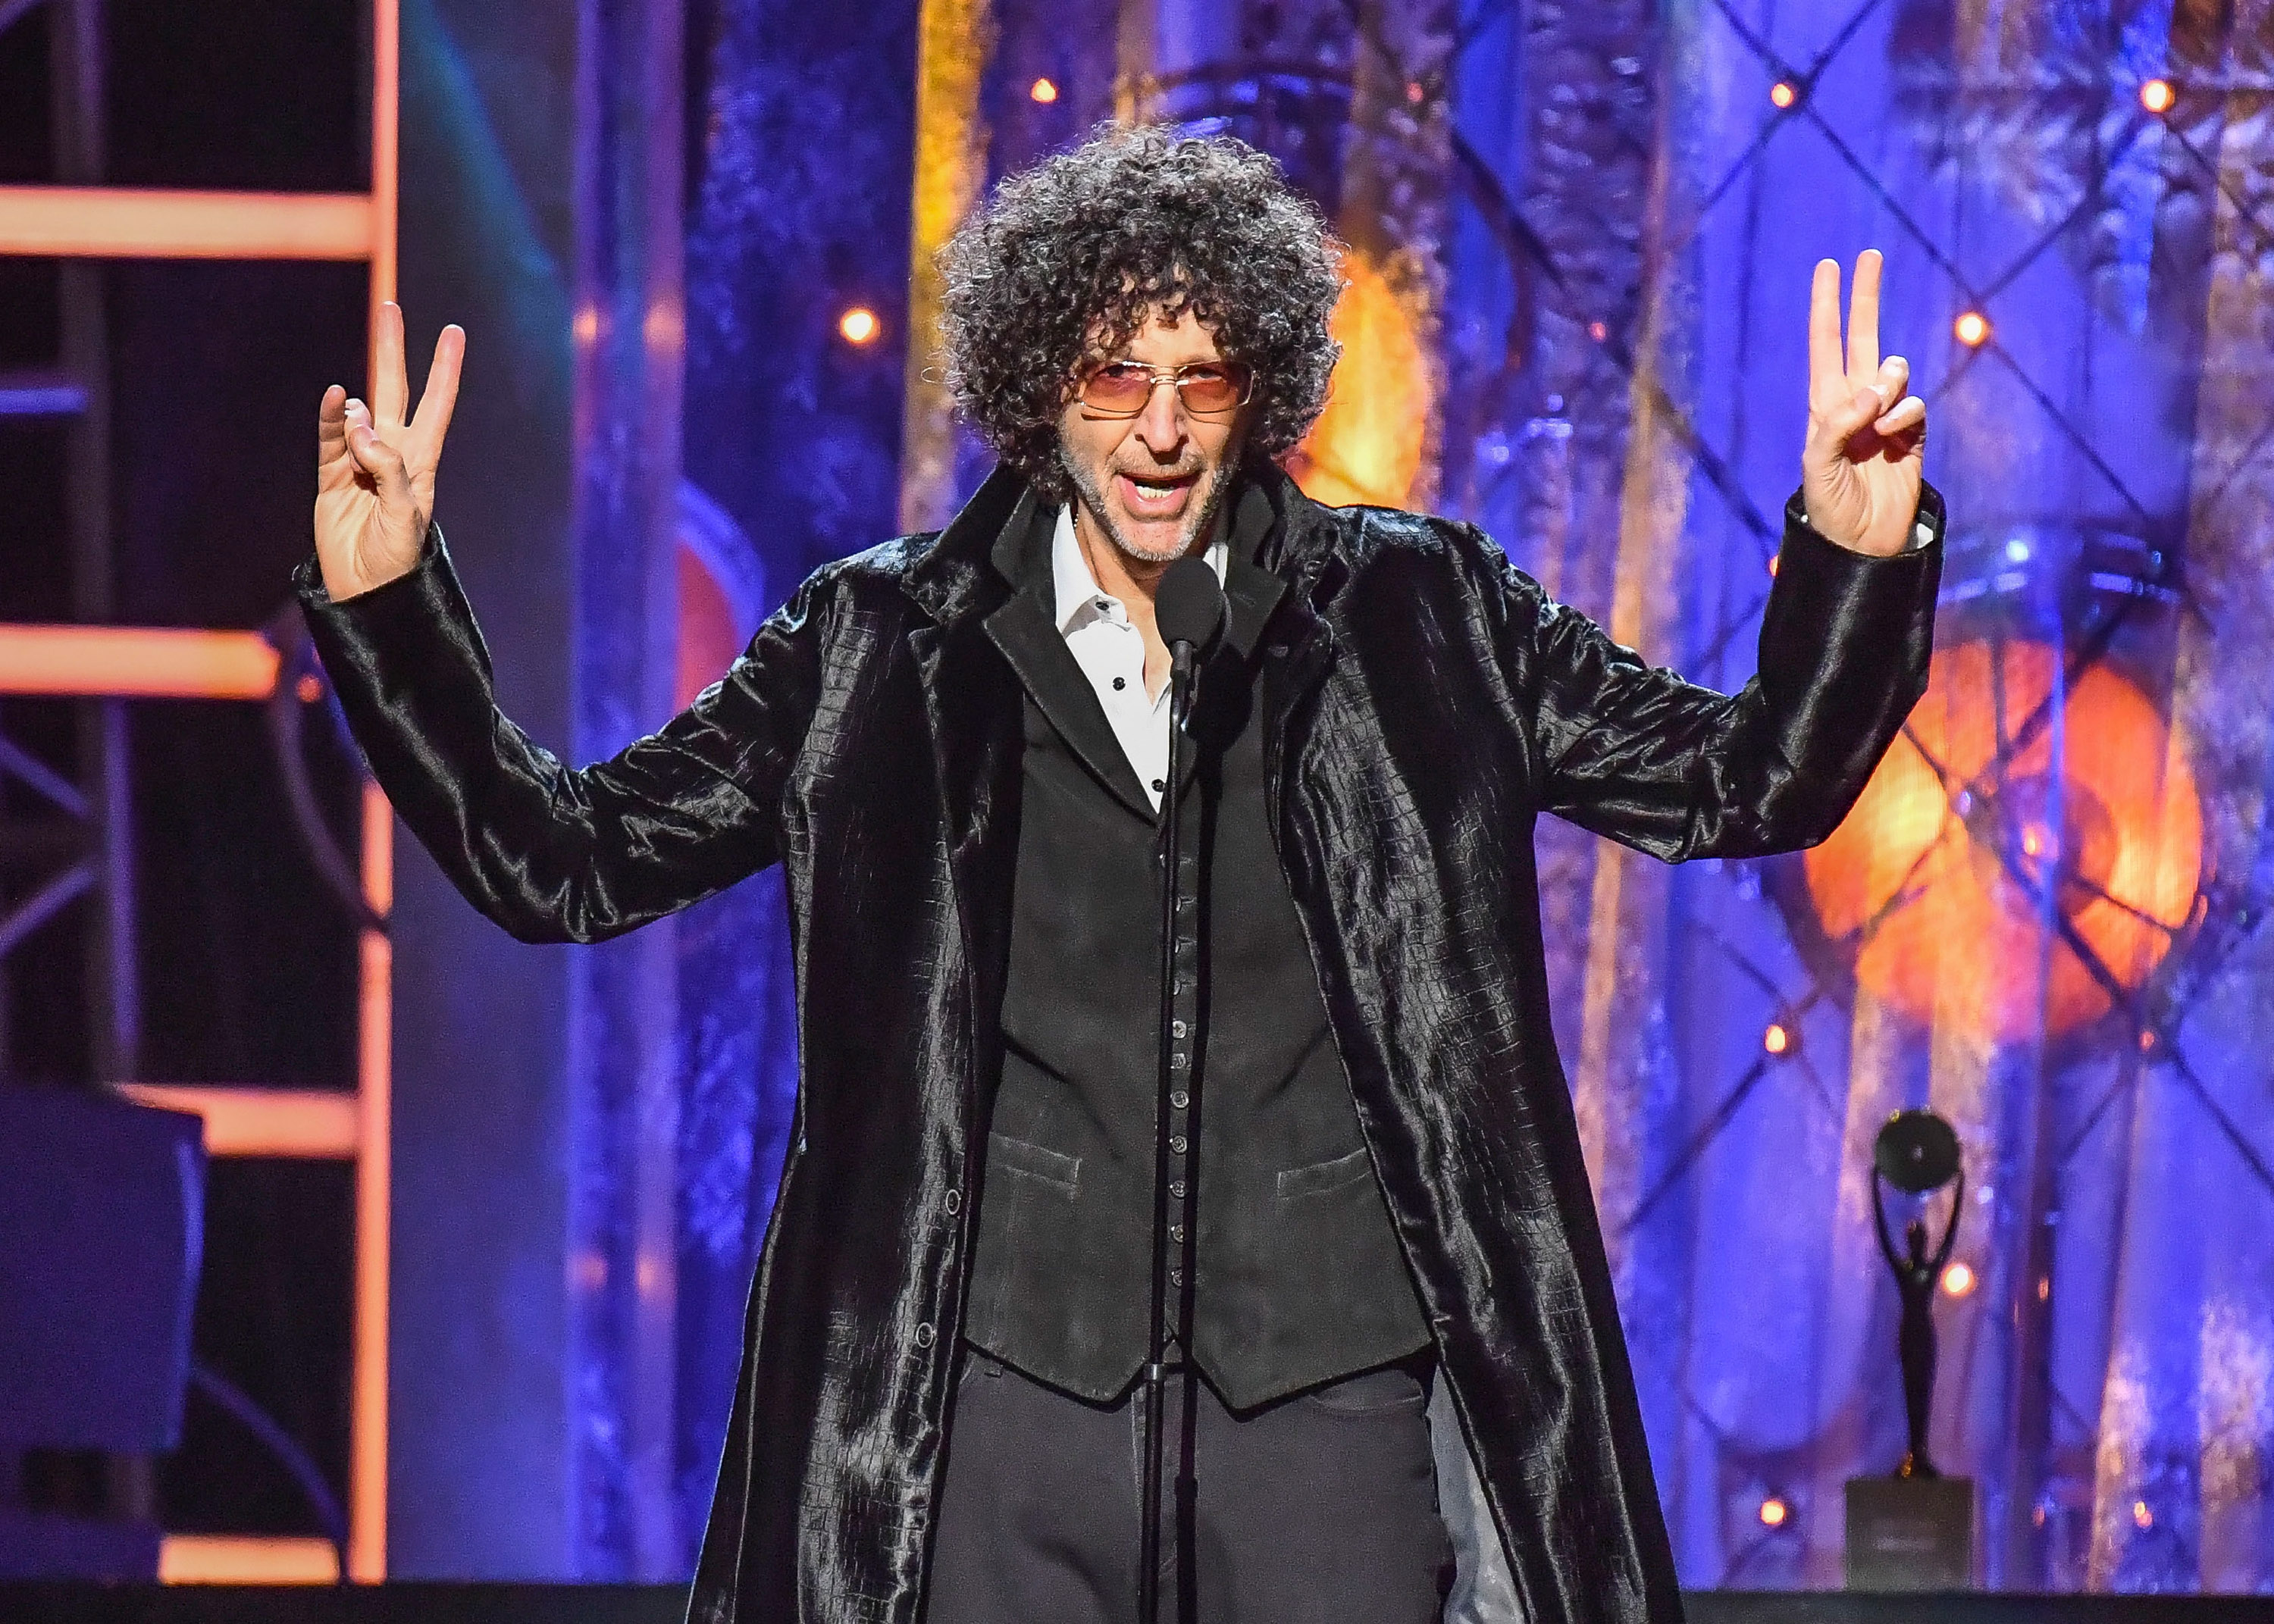 Howard Stern opened up in a new interview with New York Times Magazine